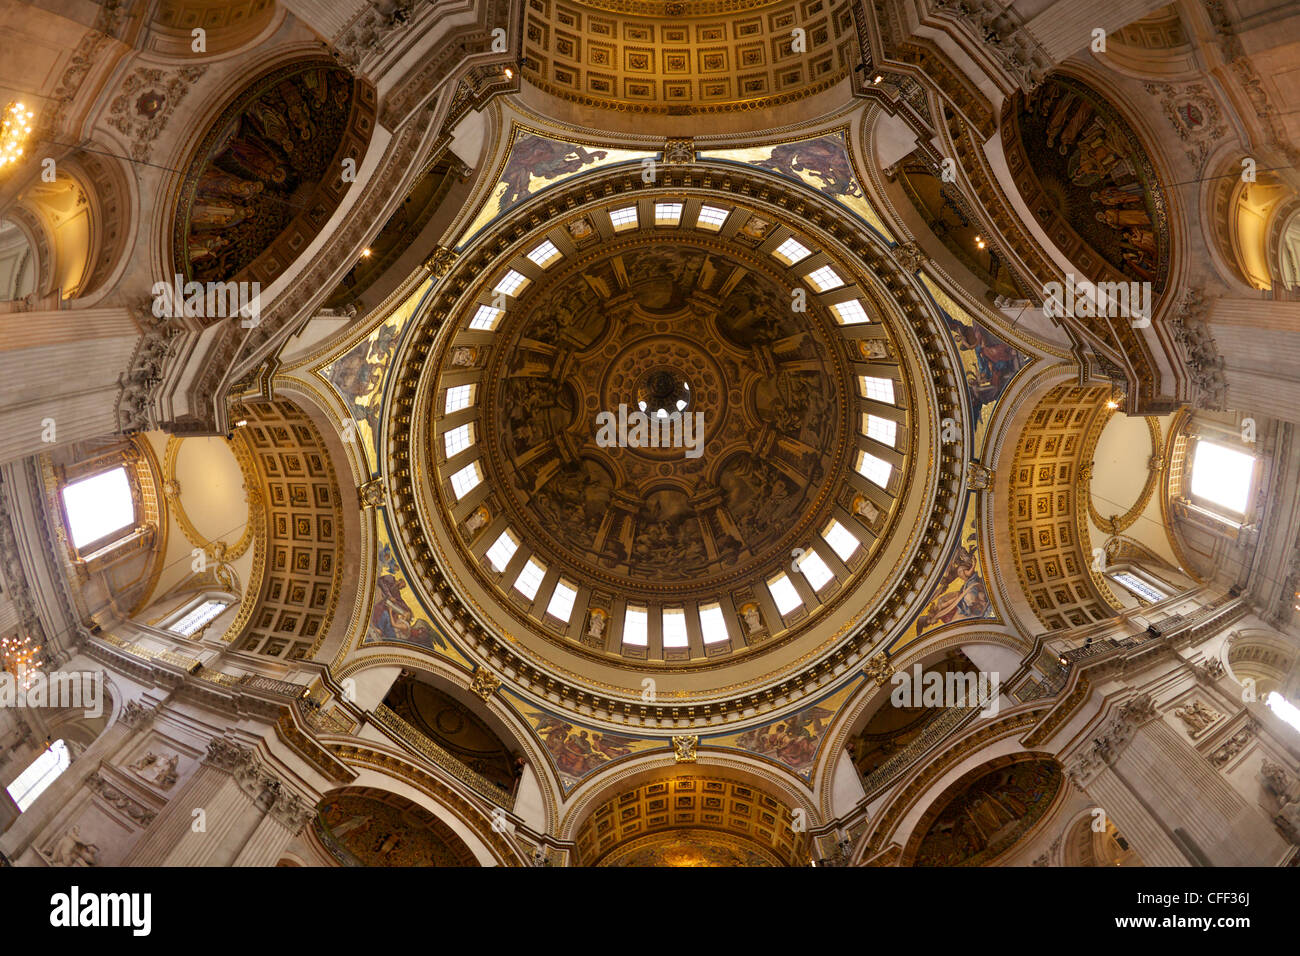 Interior Of The Dome Of St Paul S Cathedral London England